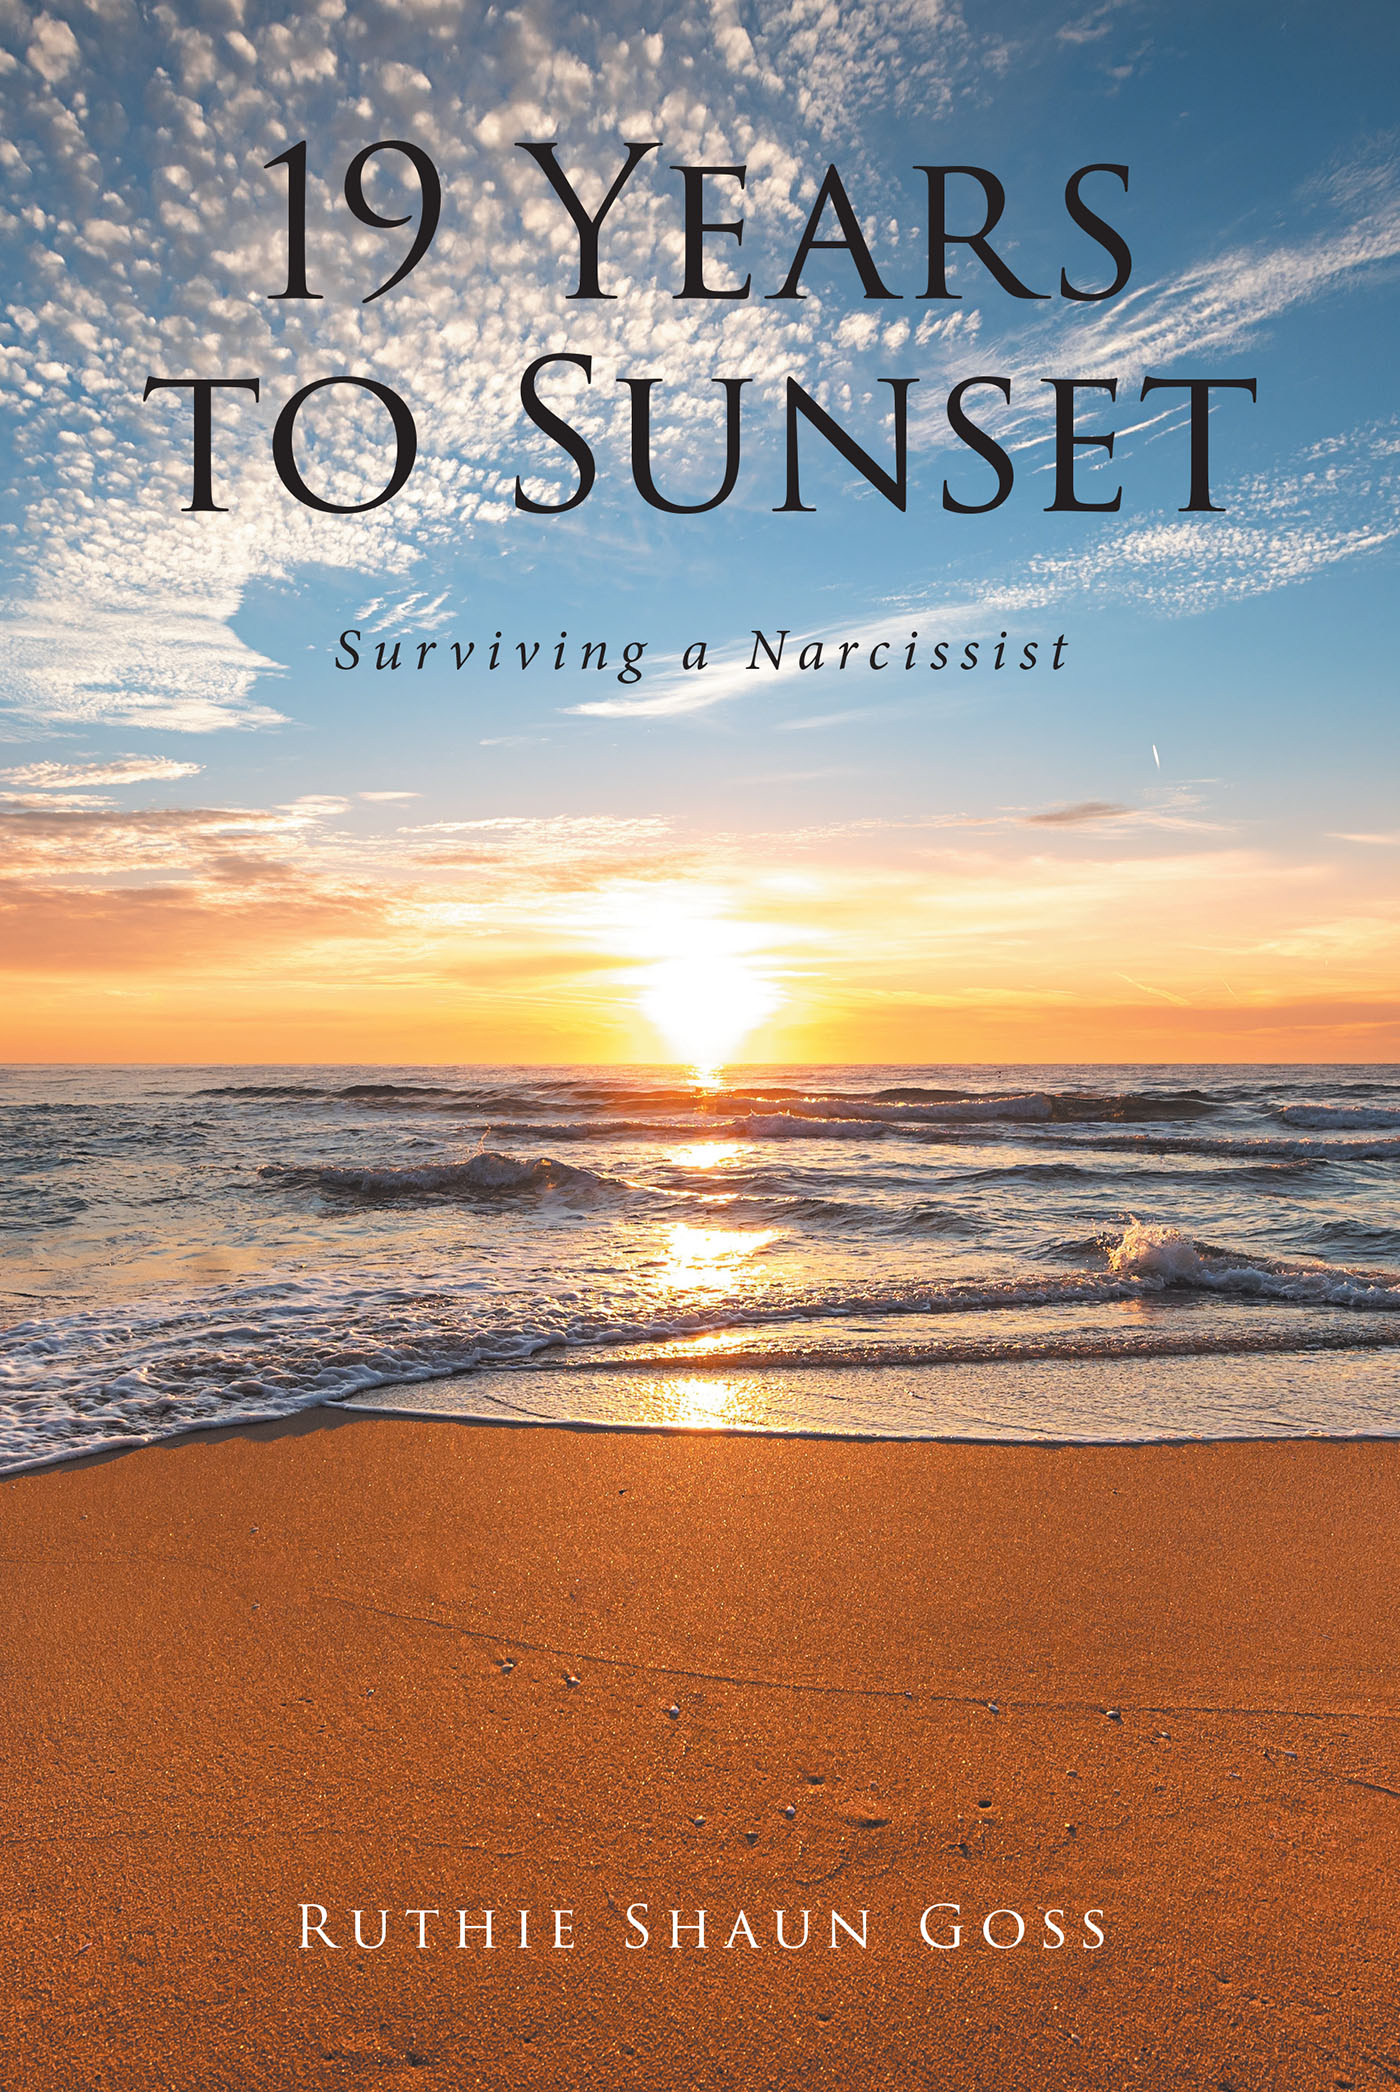 Ruthie Shaun Goss’s New Book, “19 Years to Sunset: Surviving a Narcissist,” Reflects Upon How the Author Managed to Leave a Harrowing Relationship with a Toxic Narcissist